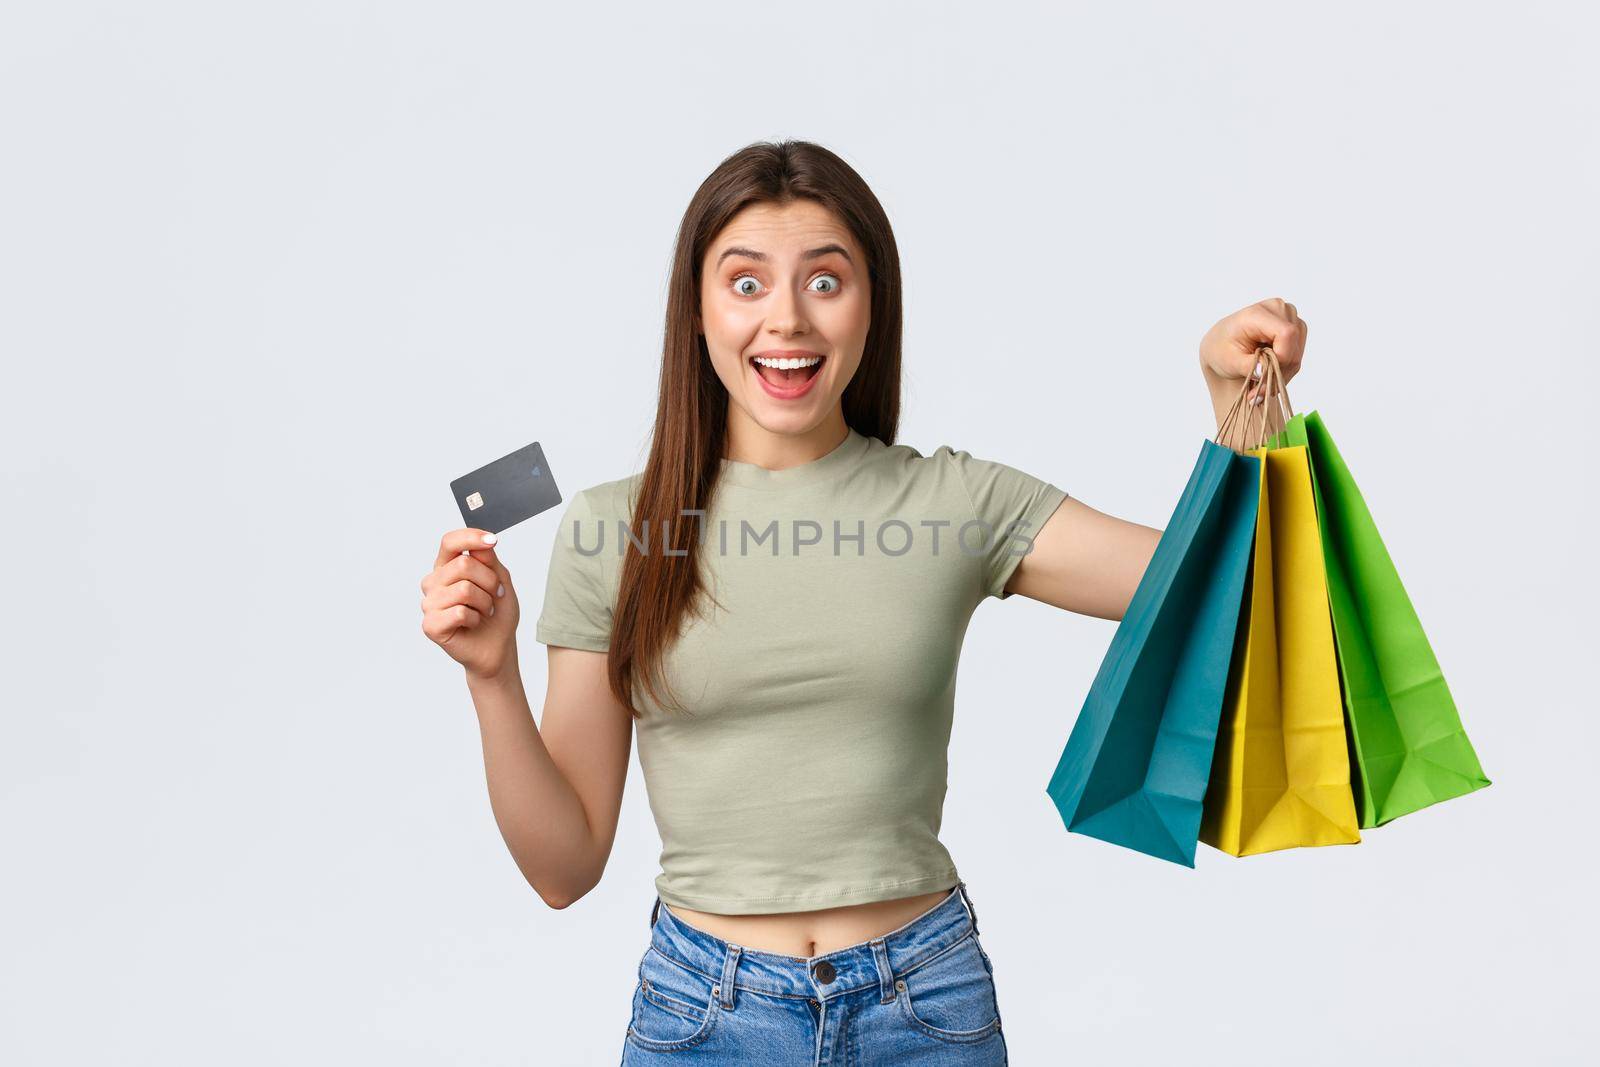 Shopping mall, lifestyle and fashion concept. Excited good-looking woman purchase new clothes, summer outfits, showing credit card and bags with goods, smiling amazed.